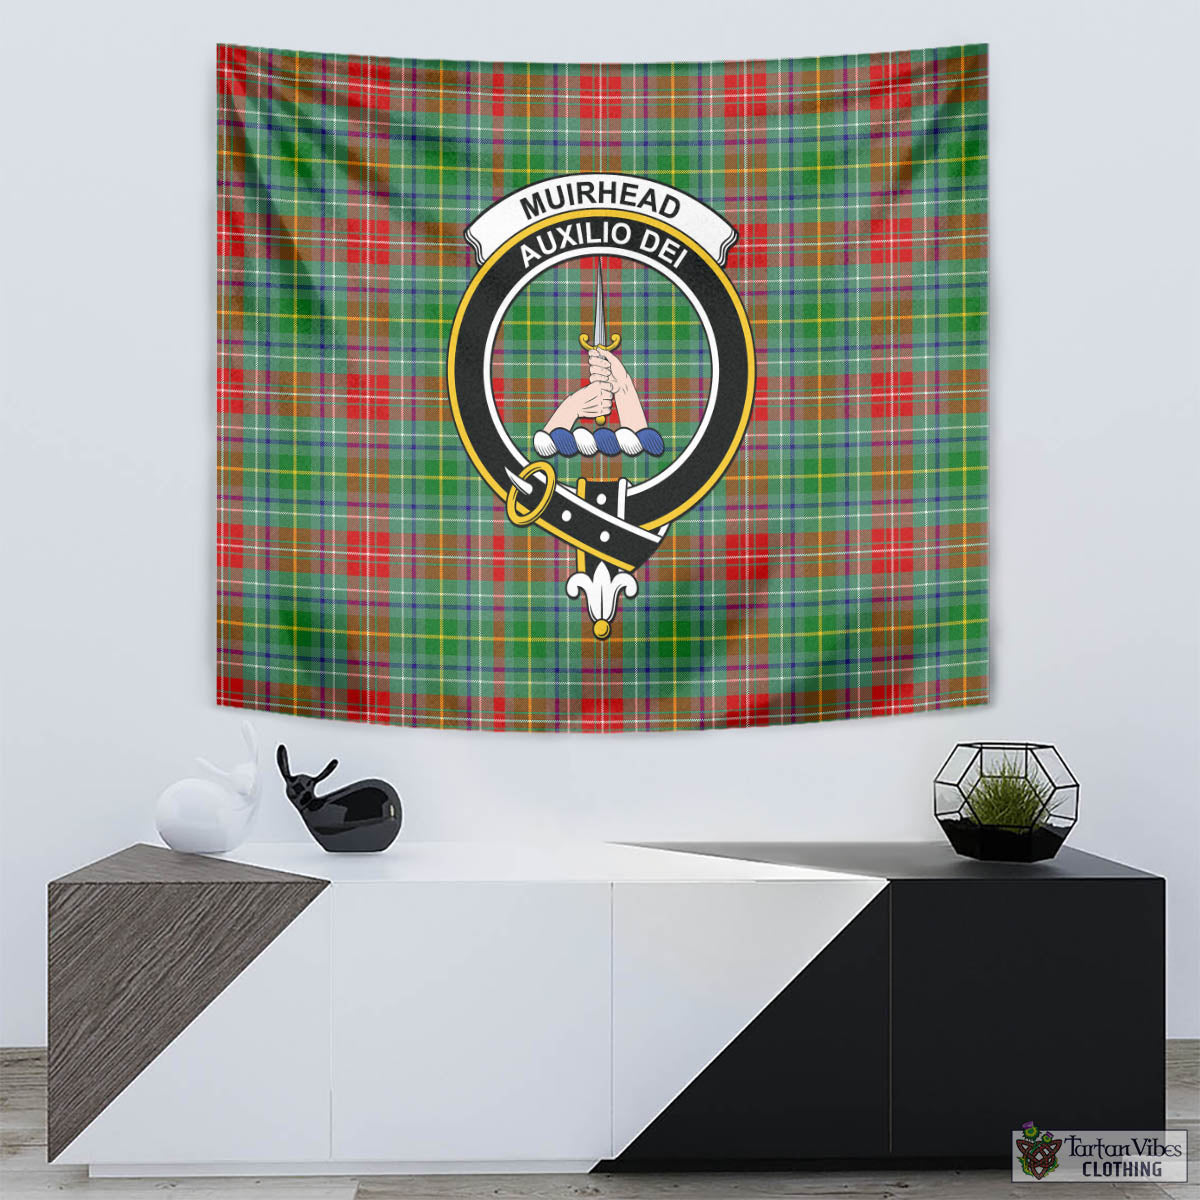 Tartan Vibes Clothing Muirhead Tartan Tapestry Wall Hanging and Home Decor for Room with Family Crest